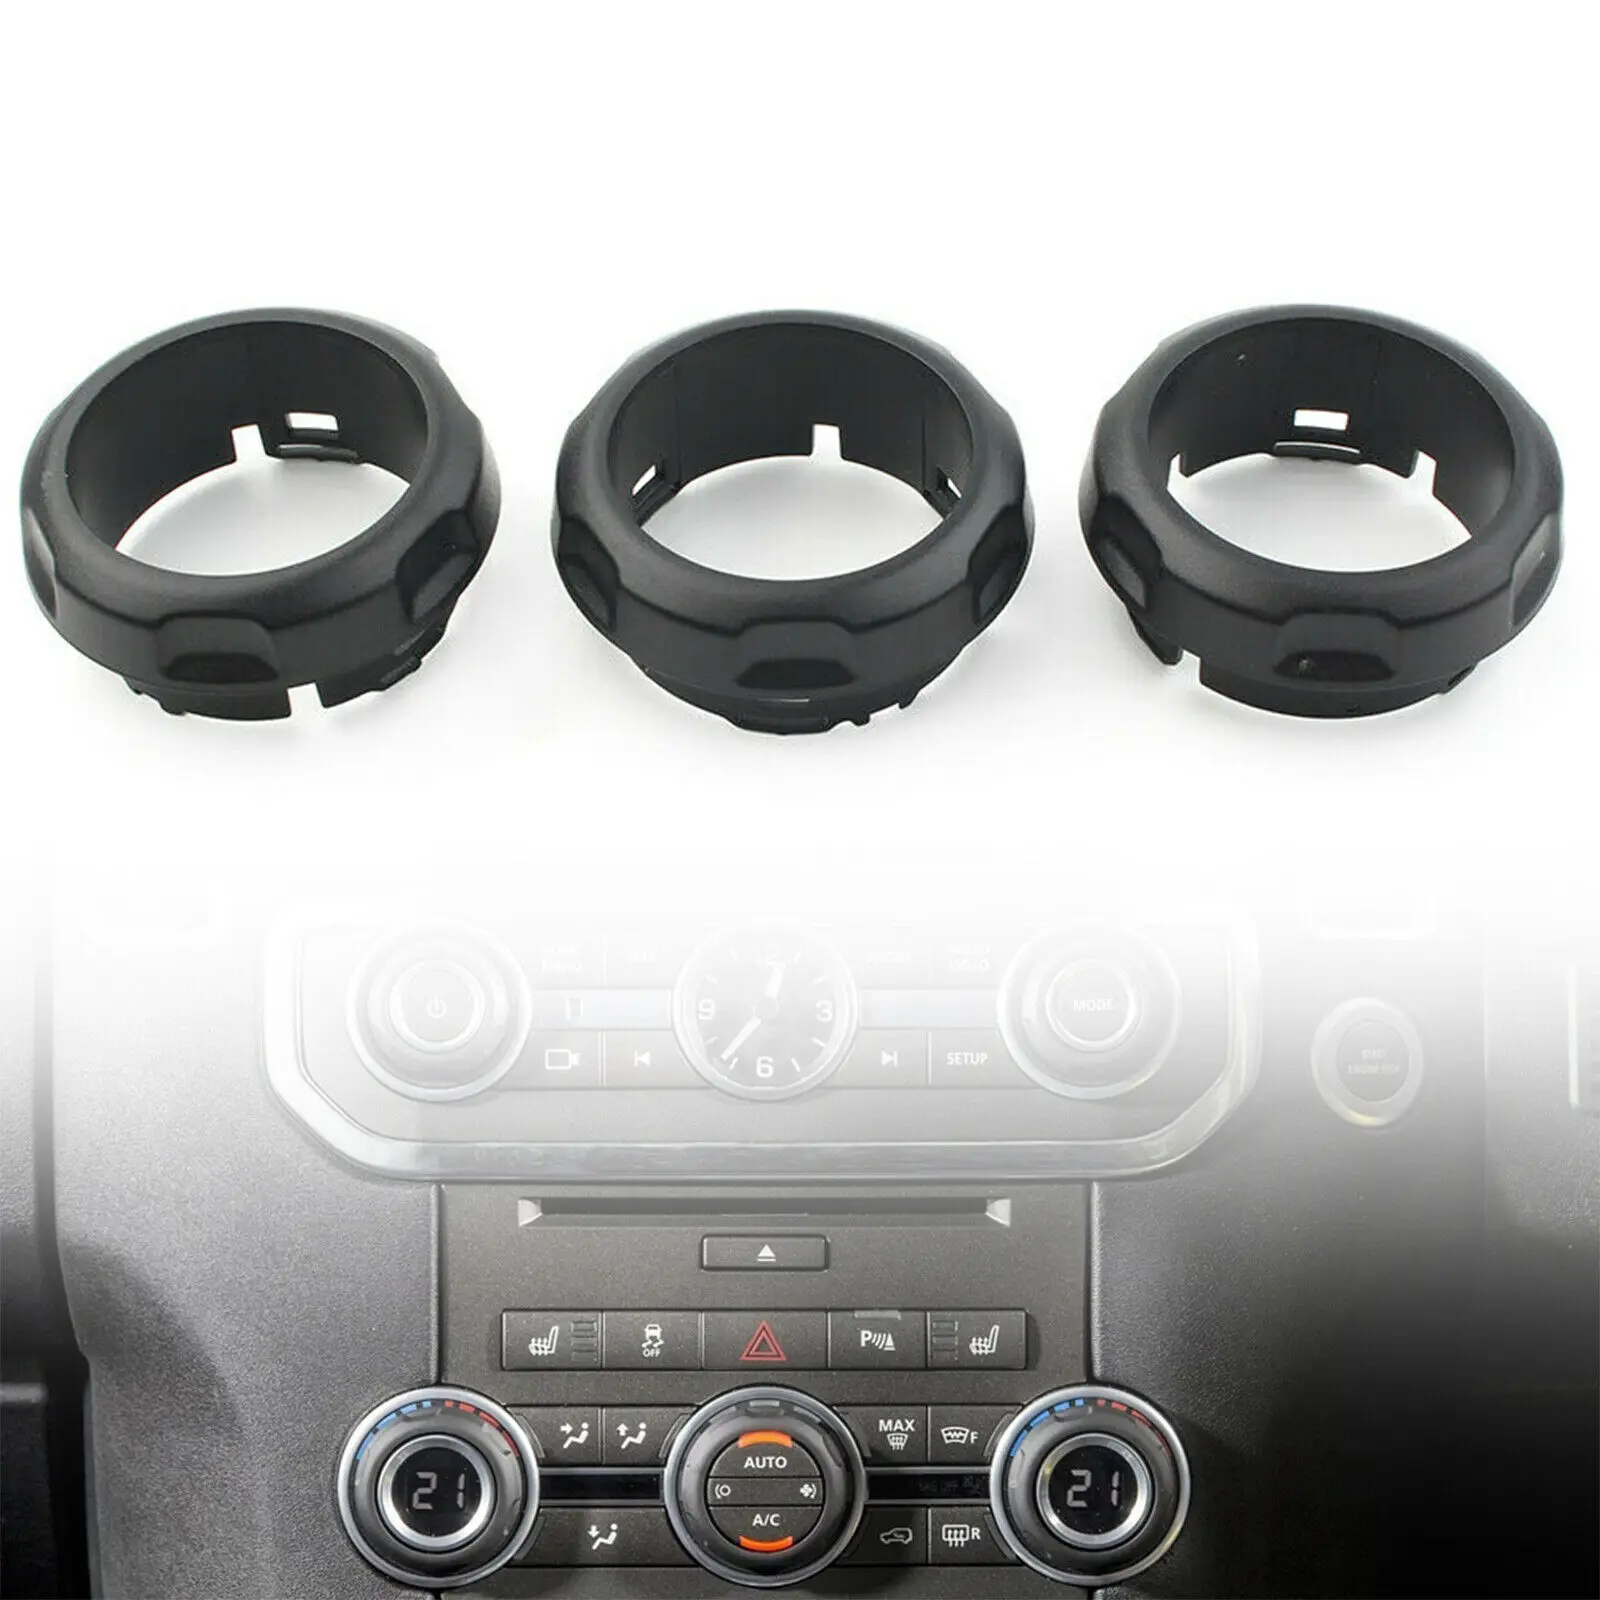 

3x AC Swicth Knob Trim LR029591 For Discovery 4 Sport Air Conditioning Knobs Interior Parts